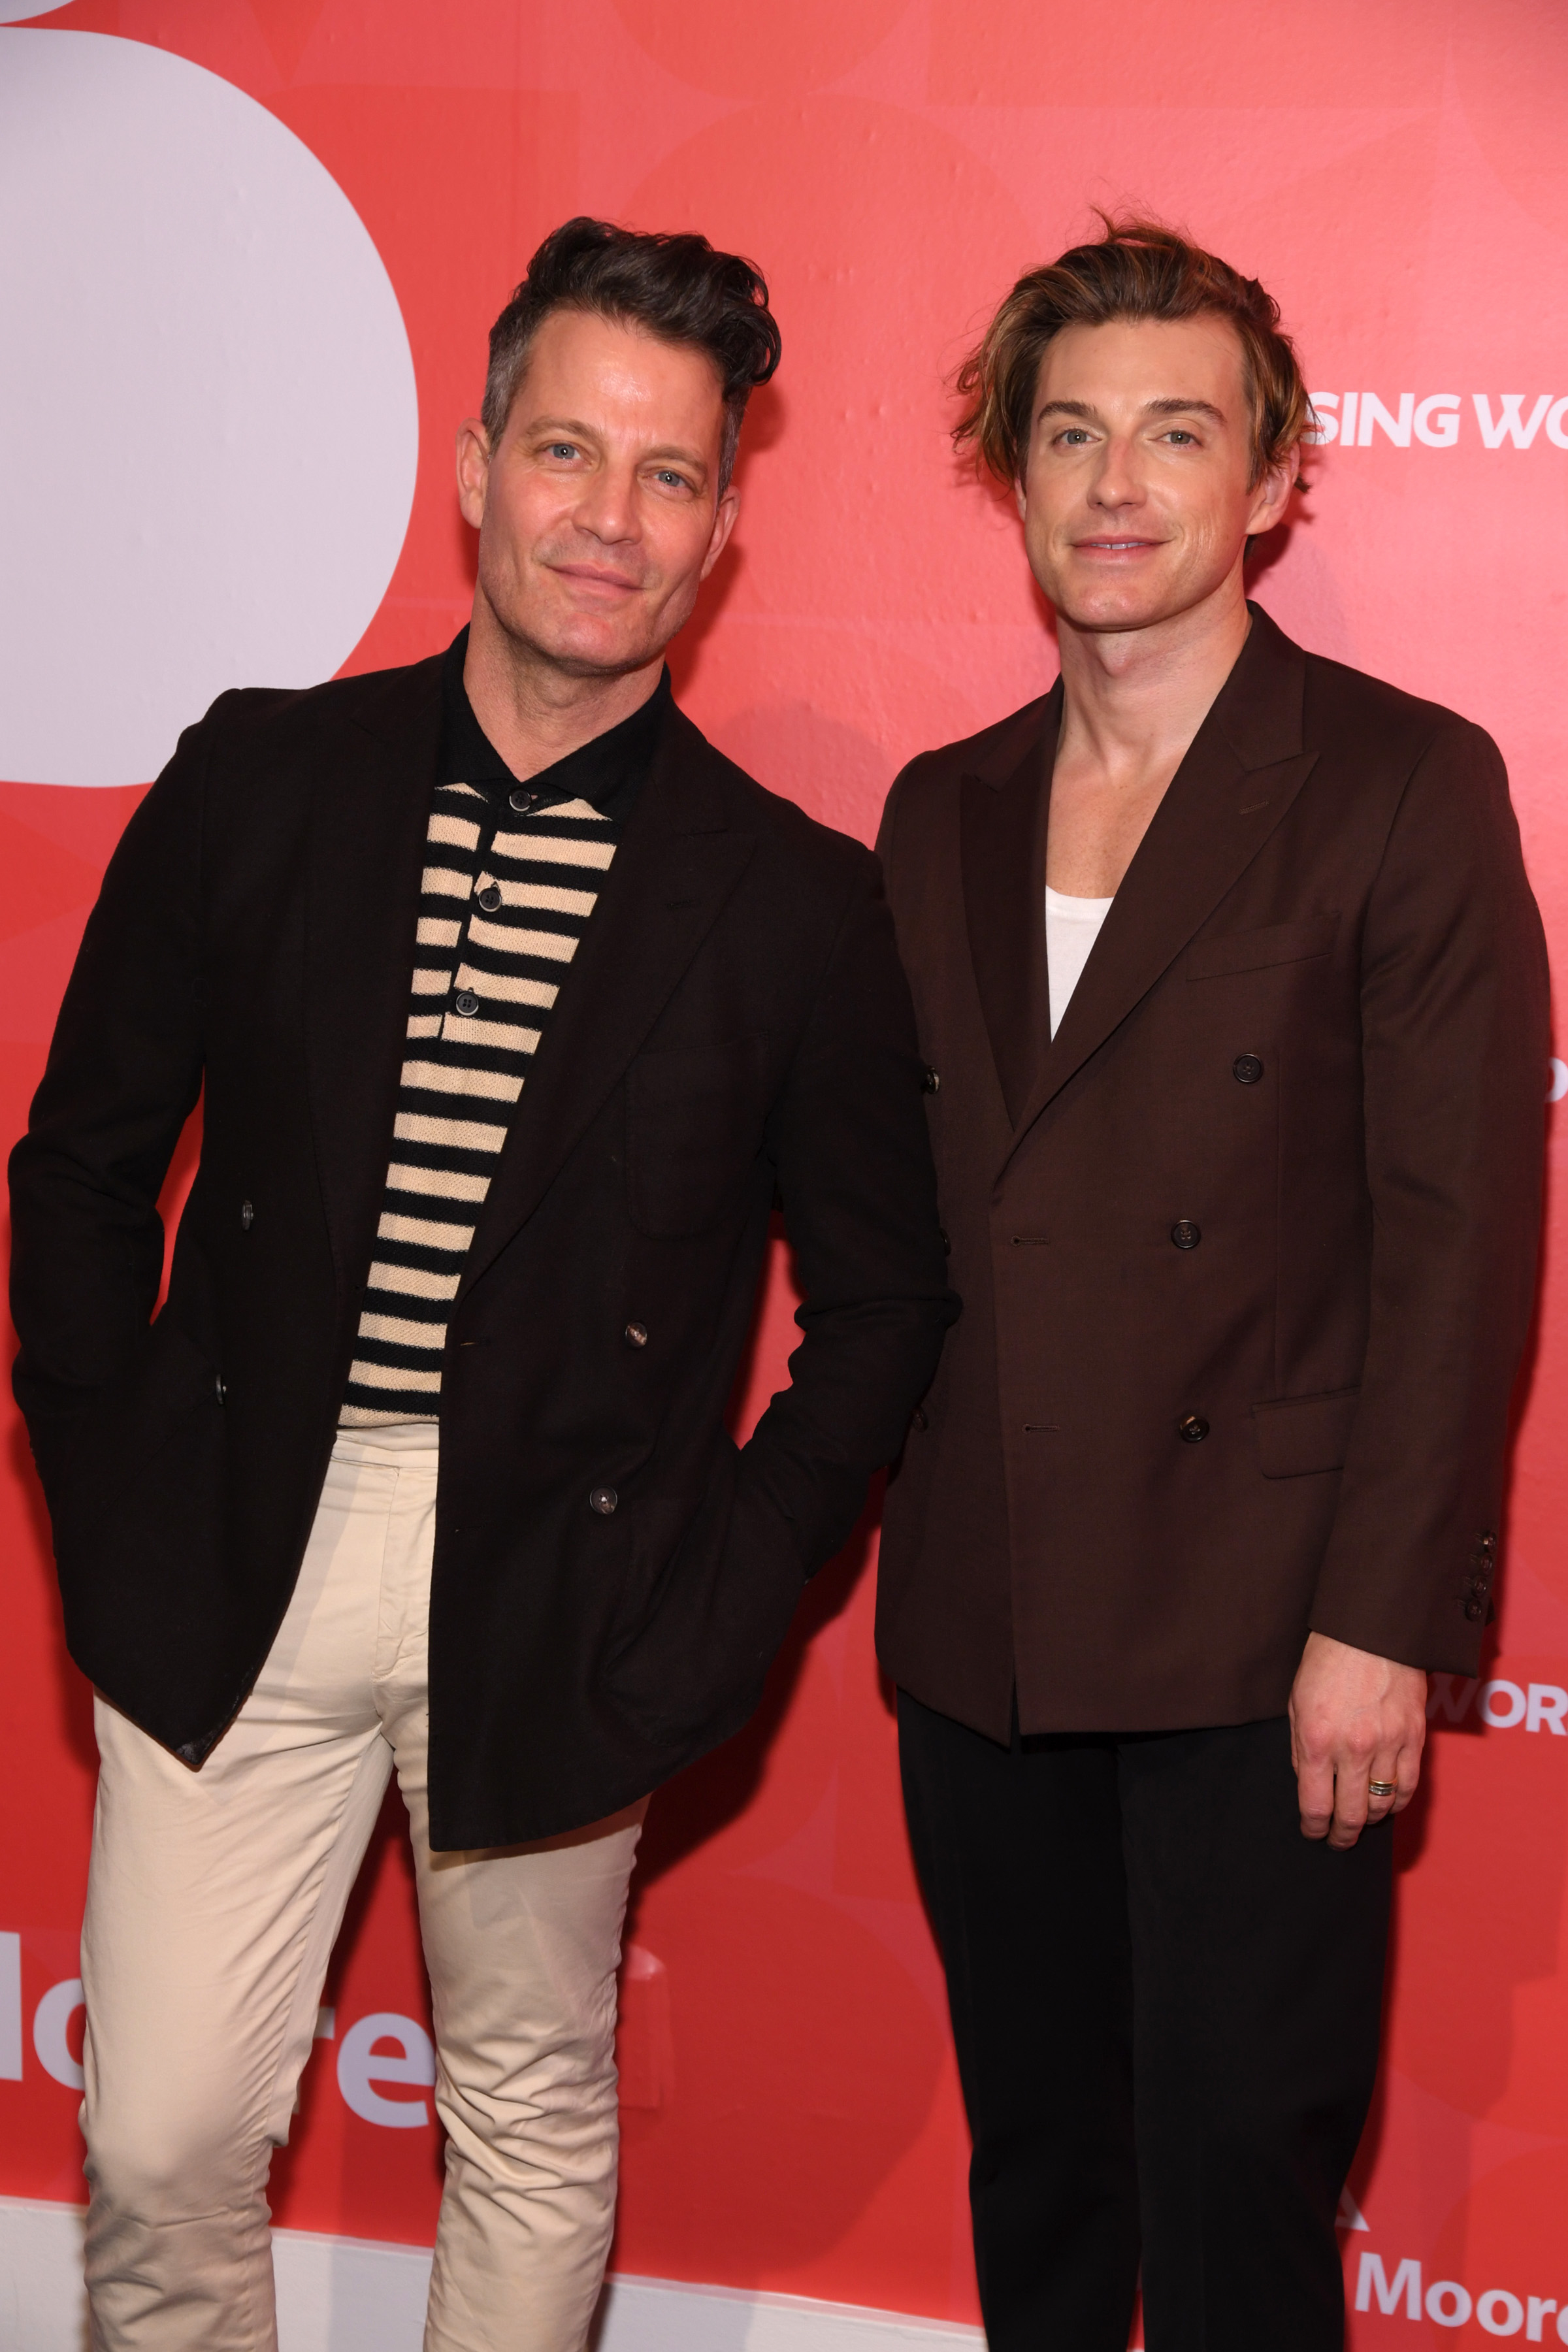 Nate and Jeremiah posing, one in a striped shirt and jacket, the other in a suit, on the red carpet